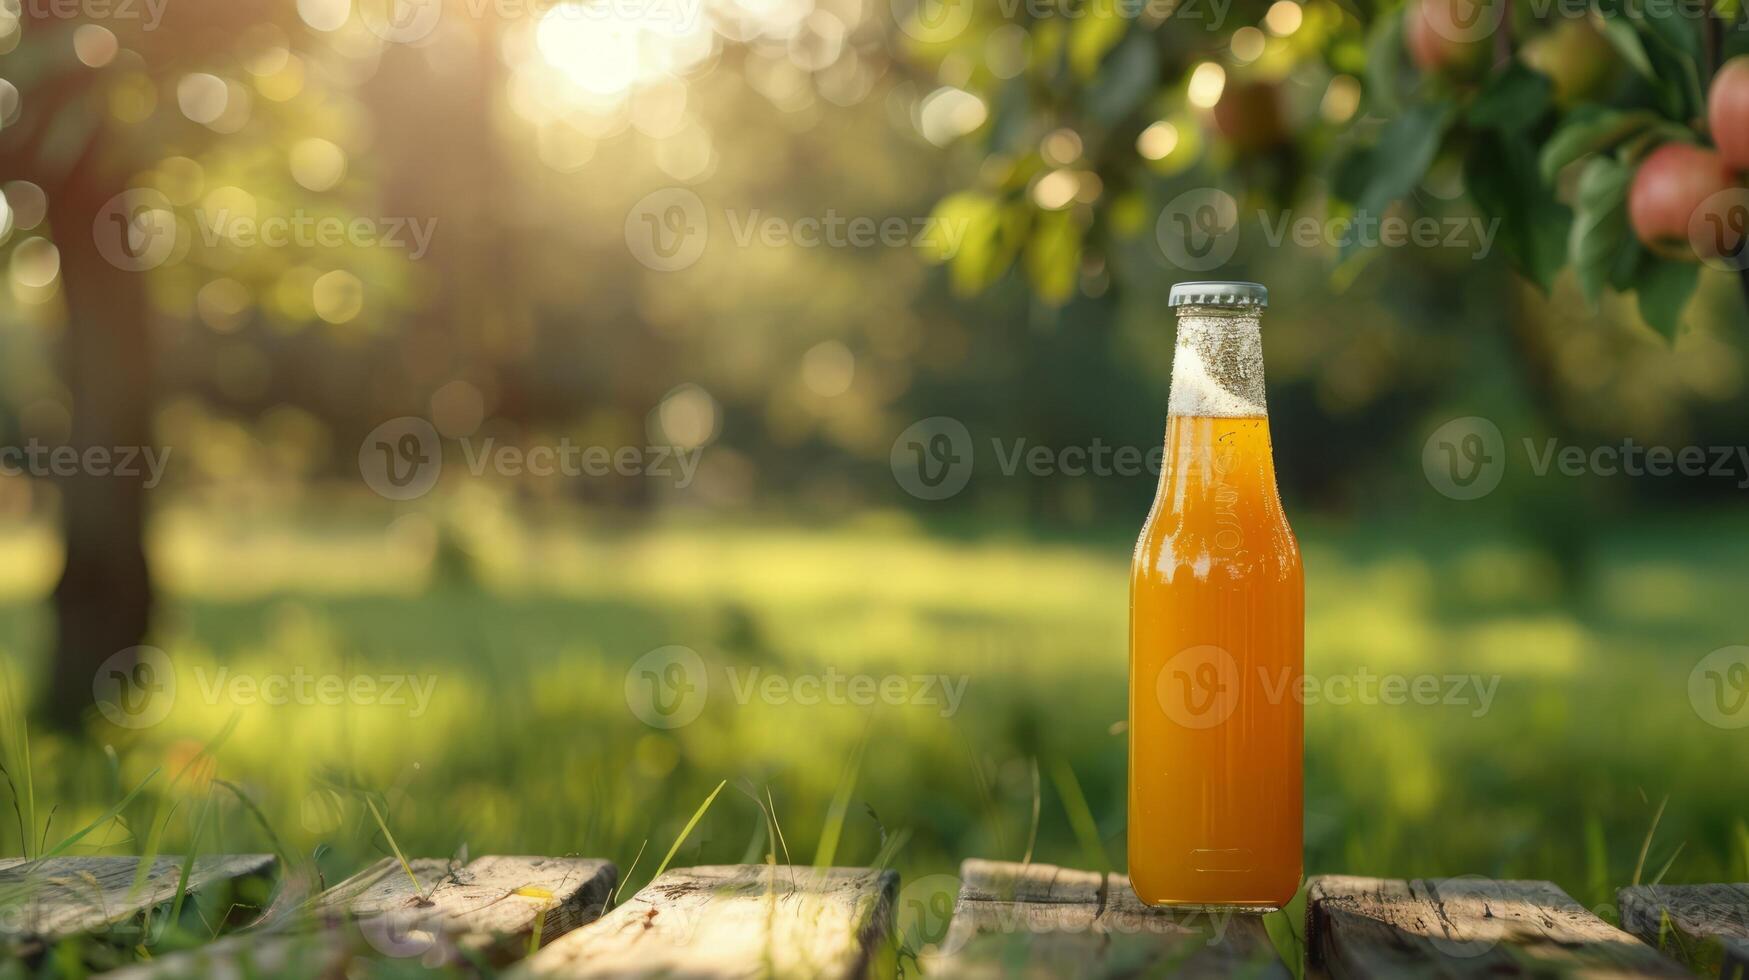 Packed apple juice on a background of green grass field photo